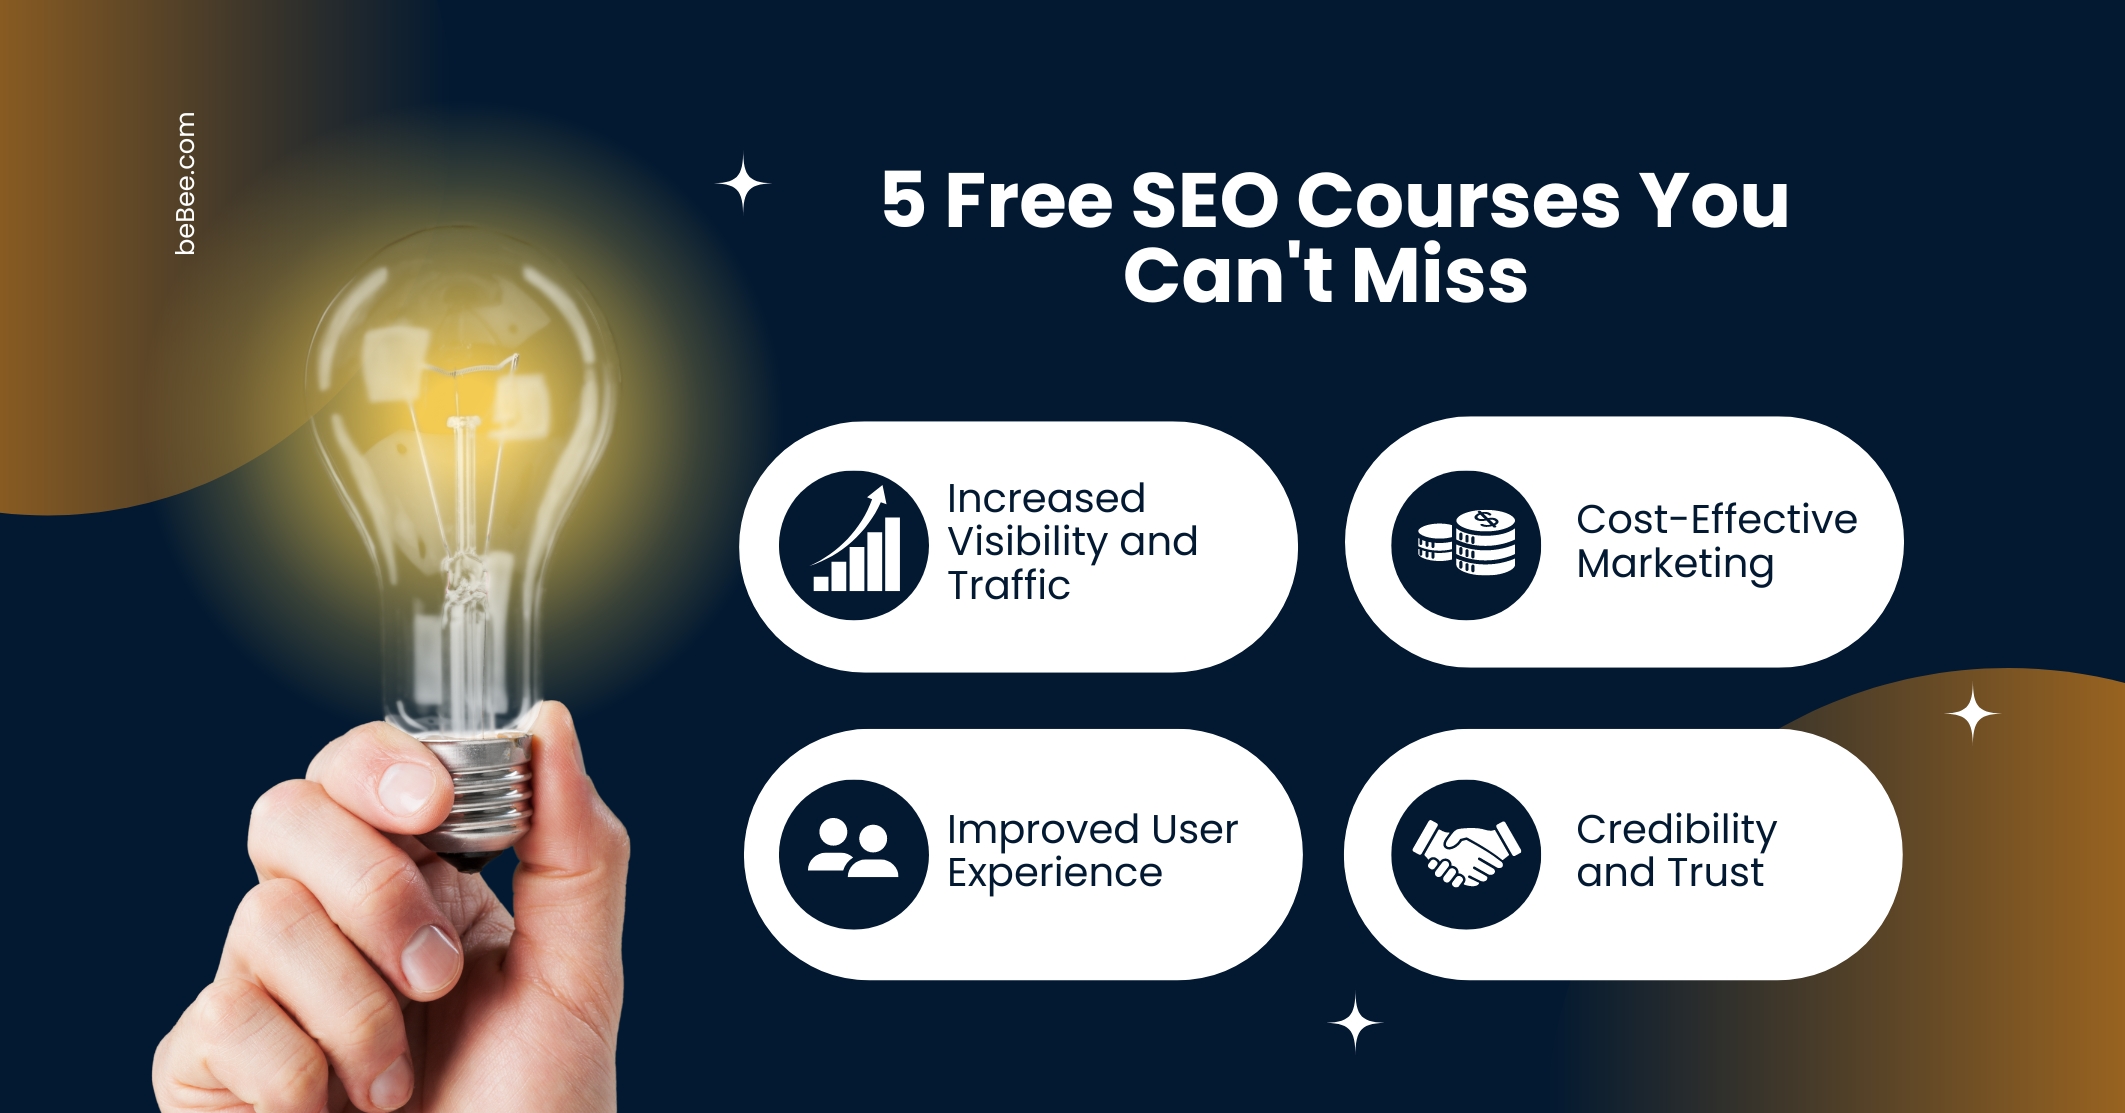 + 5Free SEO Courses You
Can't Miss

IS
0
oO
o
jo}
@
[o}
Q

  

Increased
Visibility and
Traffic

Cost-Effective
Marketing

Improved User Credibility
Experience and Trust